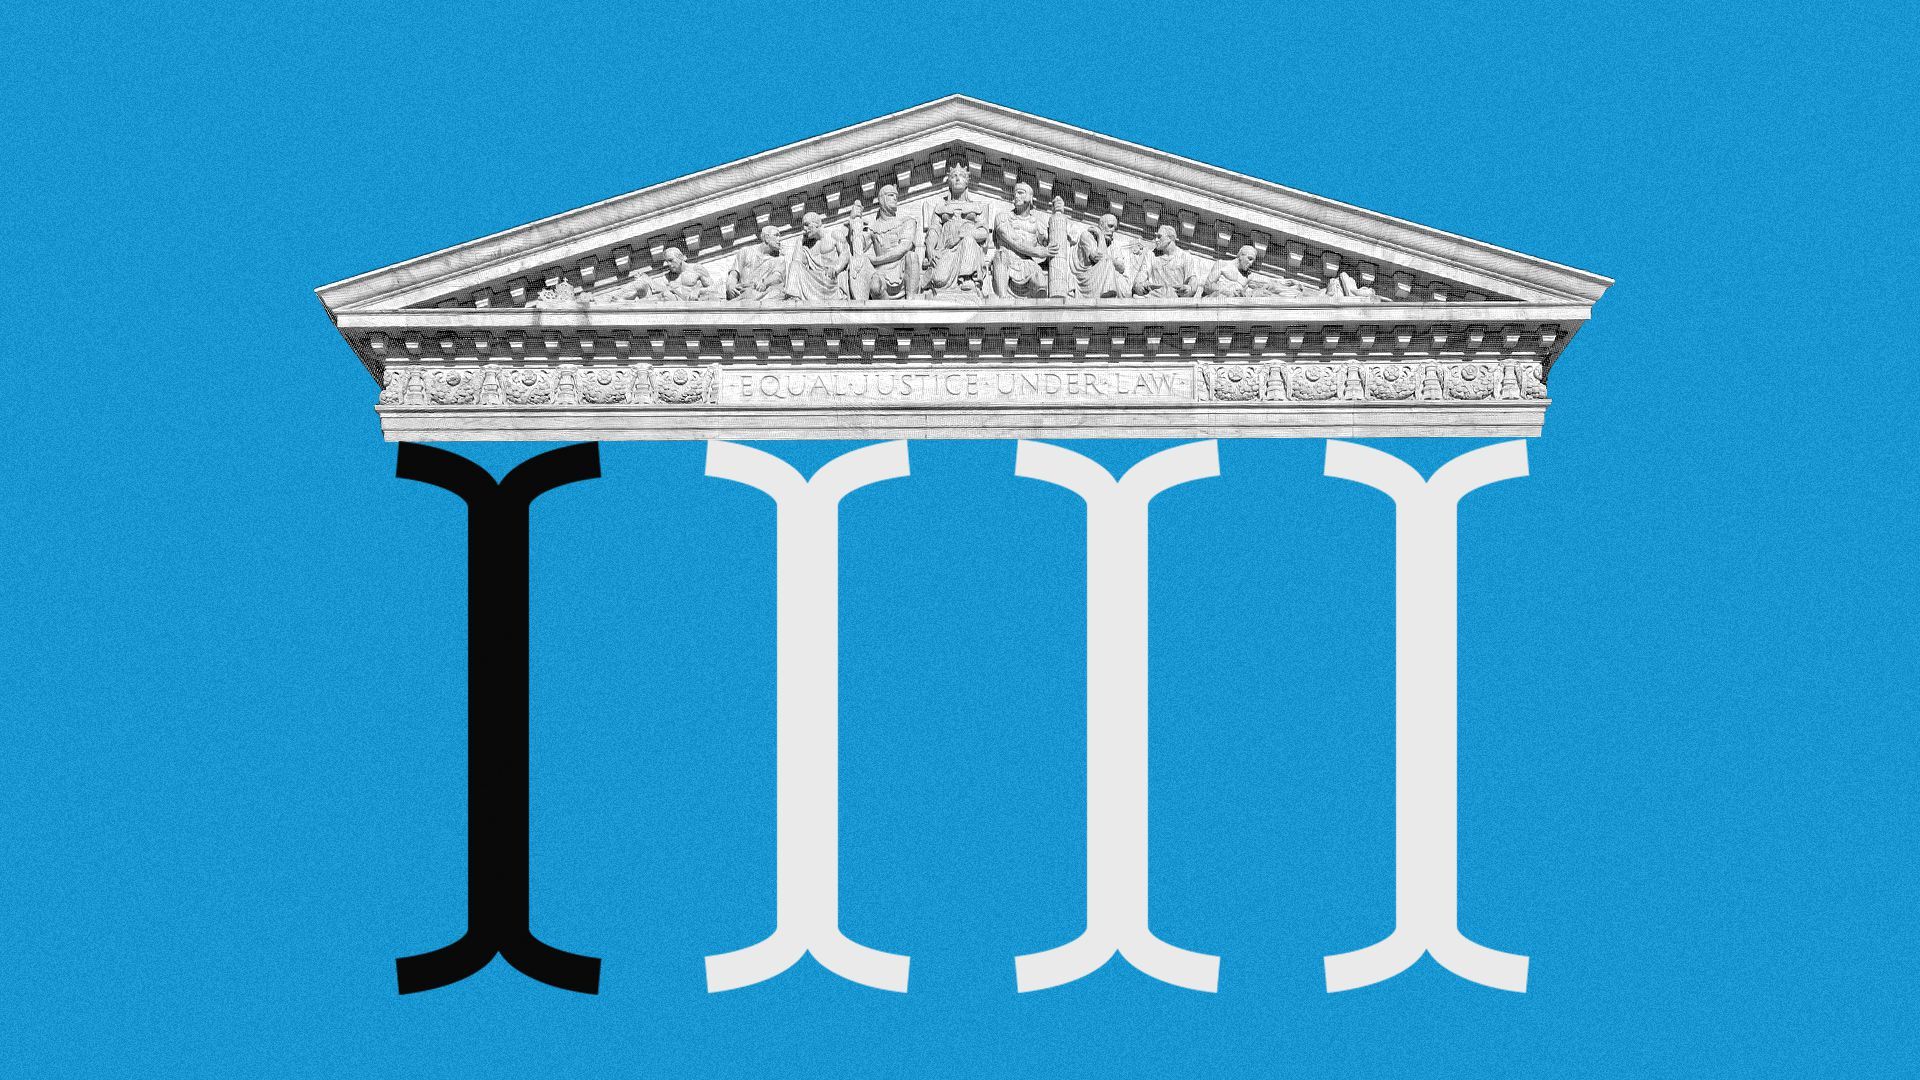  Illustration of the Supreme Court's columns as computer text cursors. 